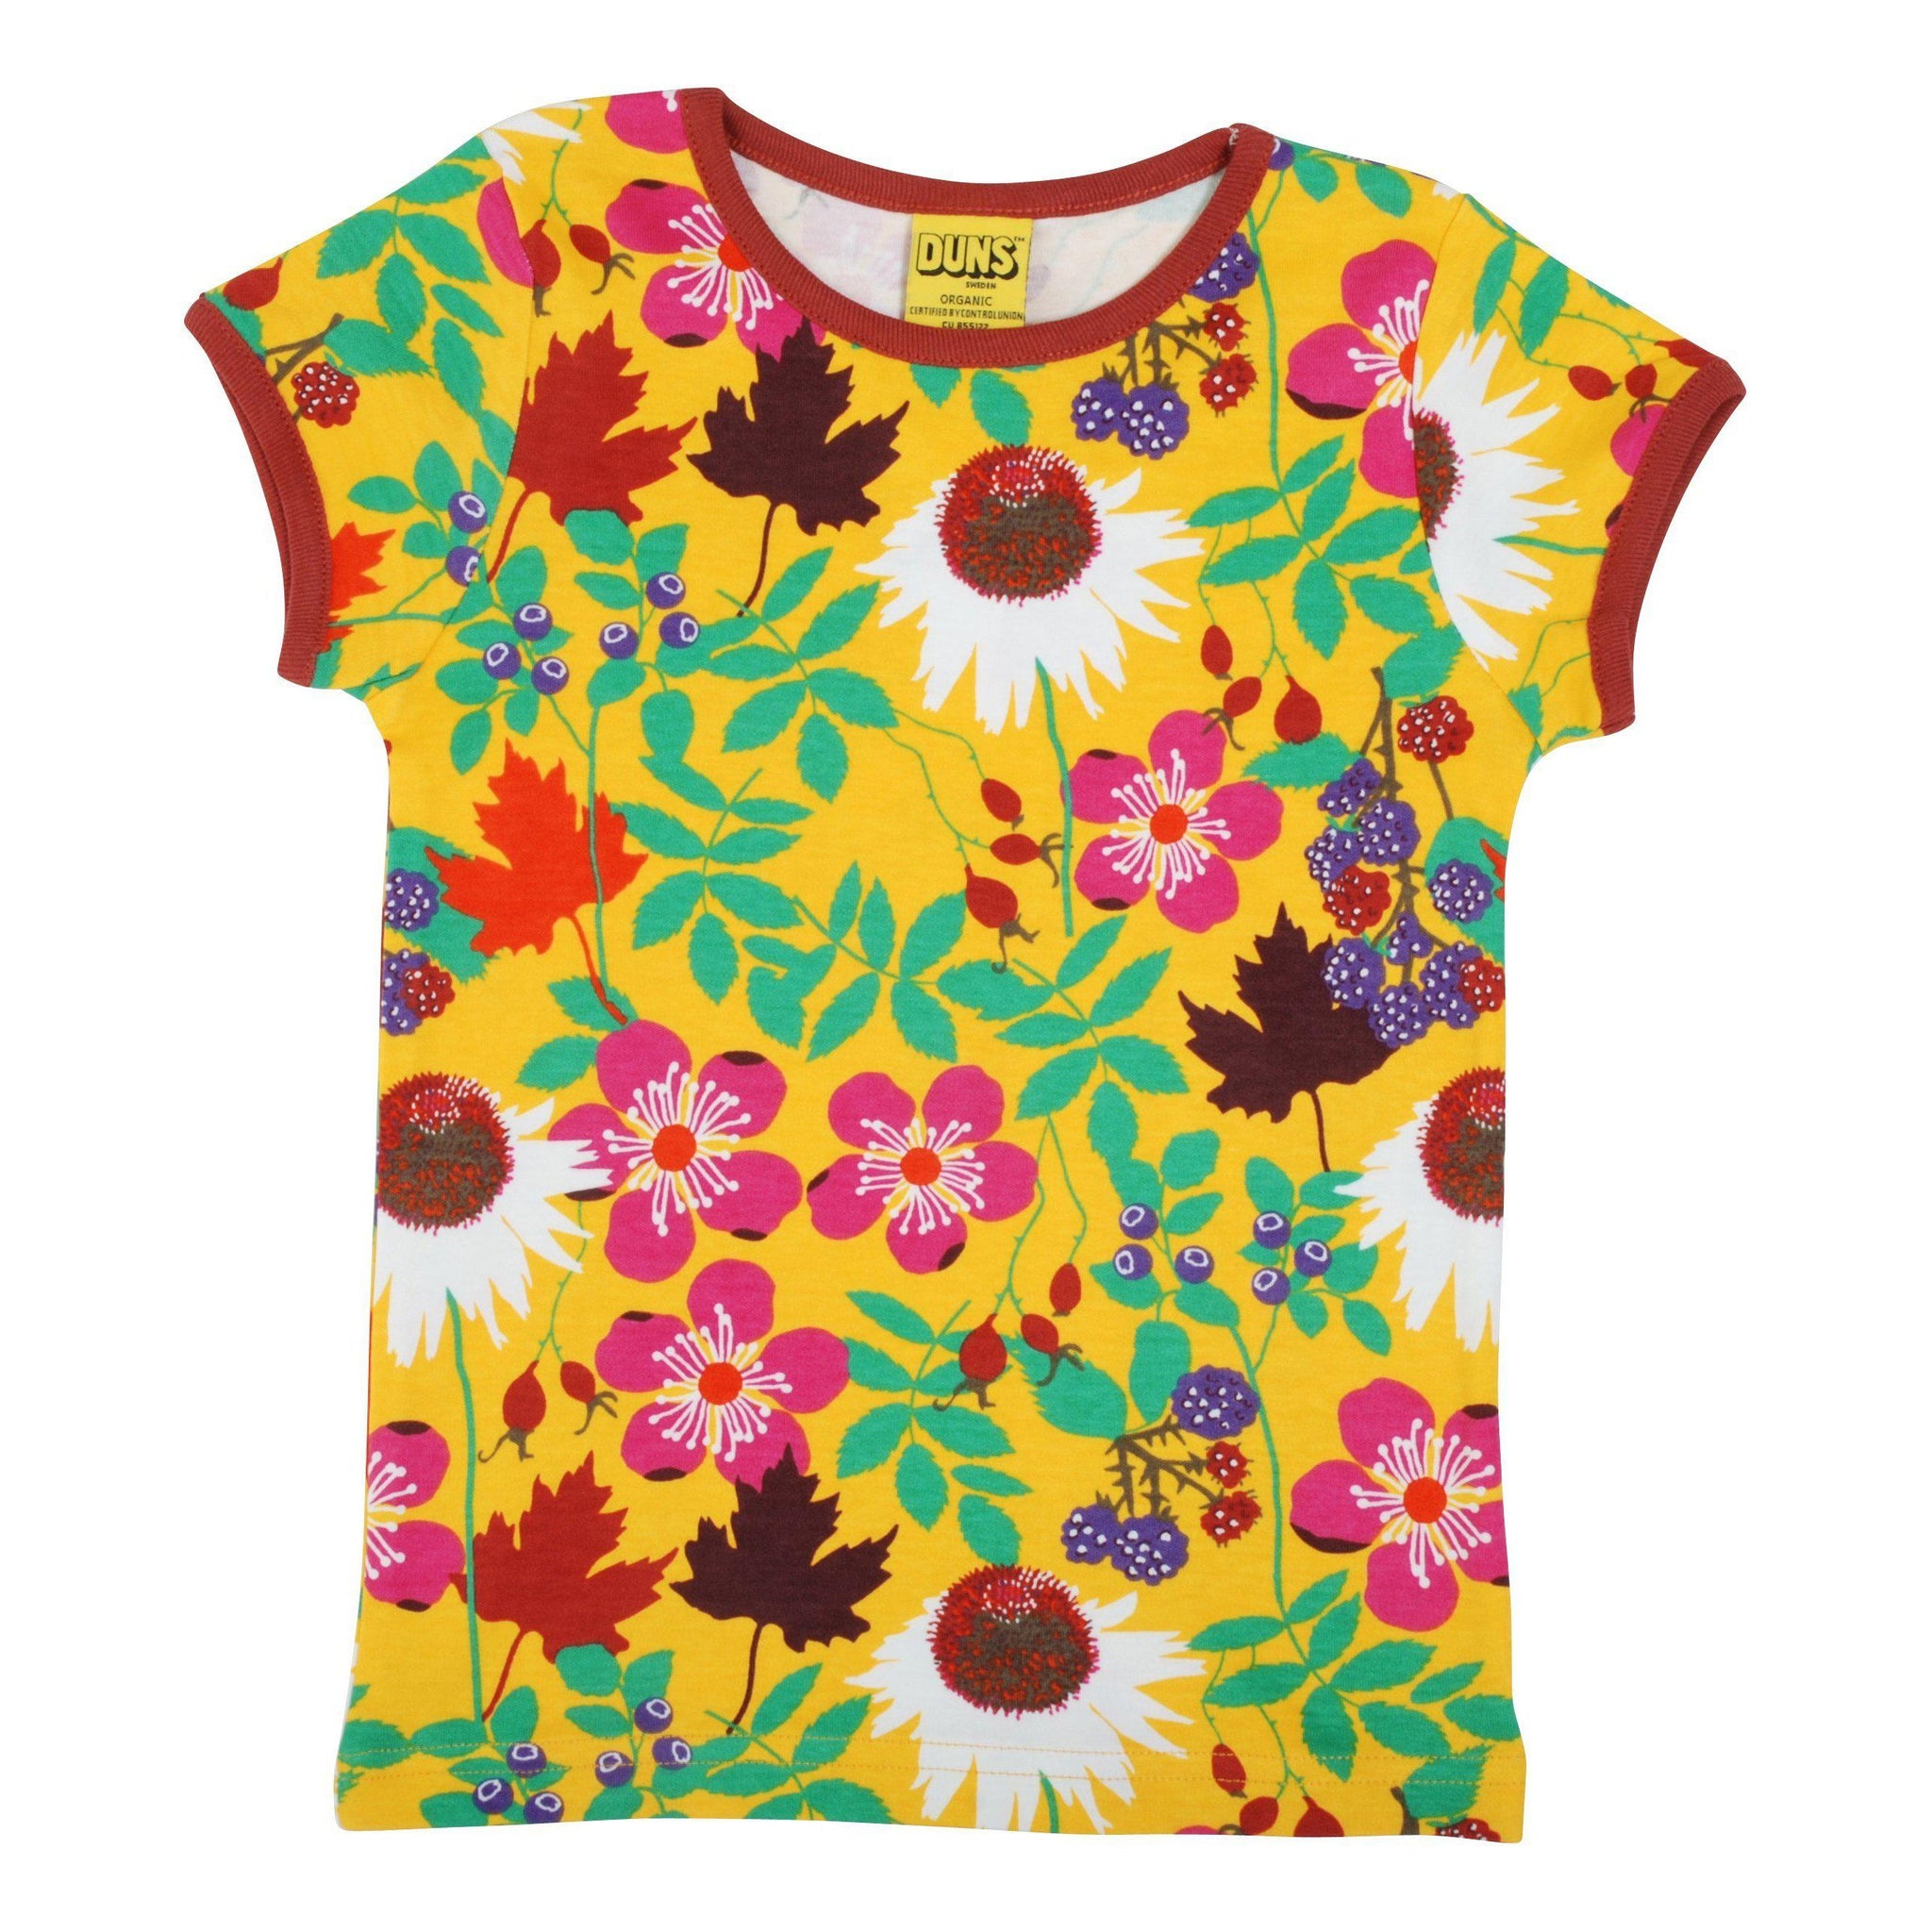 DUNS Sweden - Autumn Flowers Short Sleeved Top (Yellow) (3 Years)